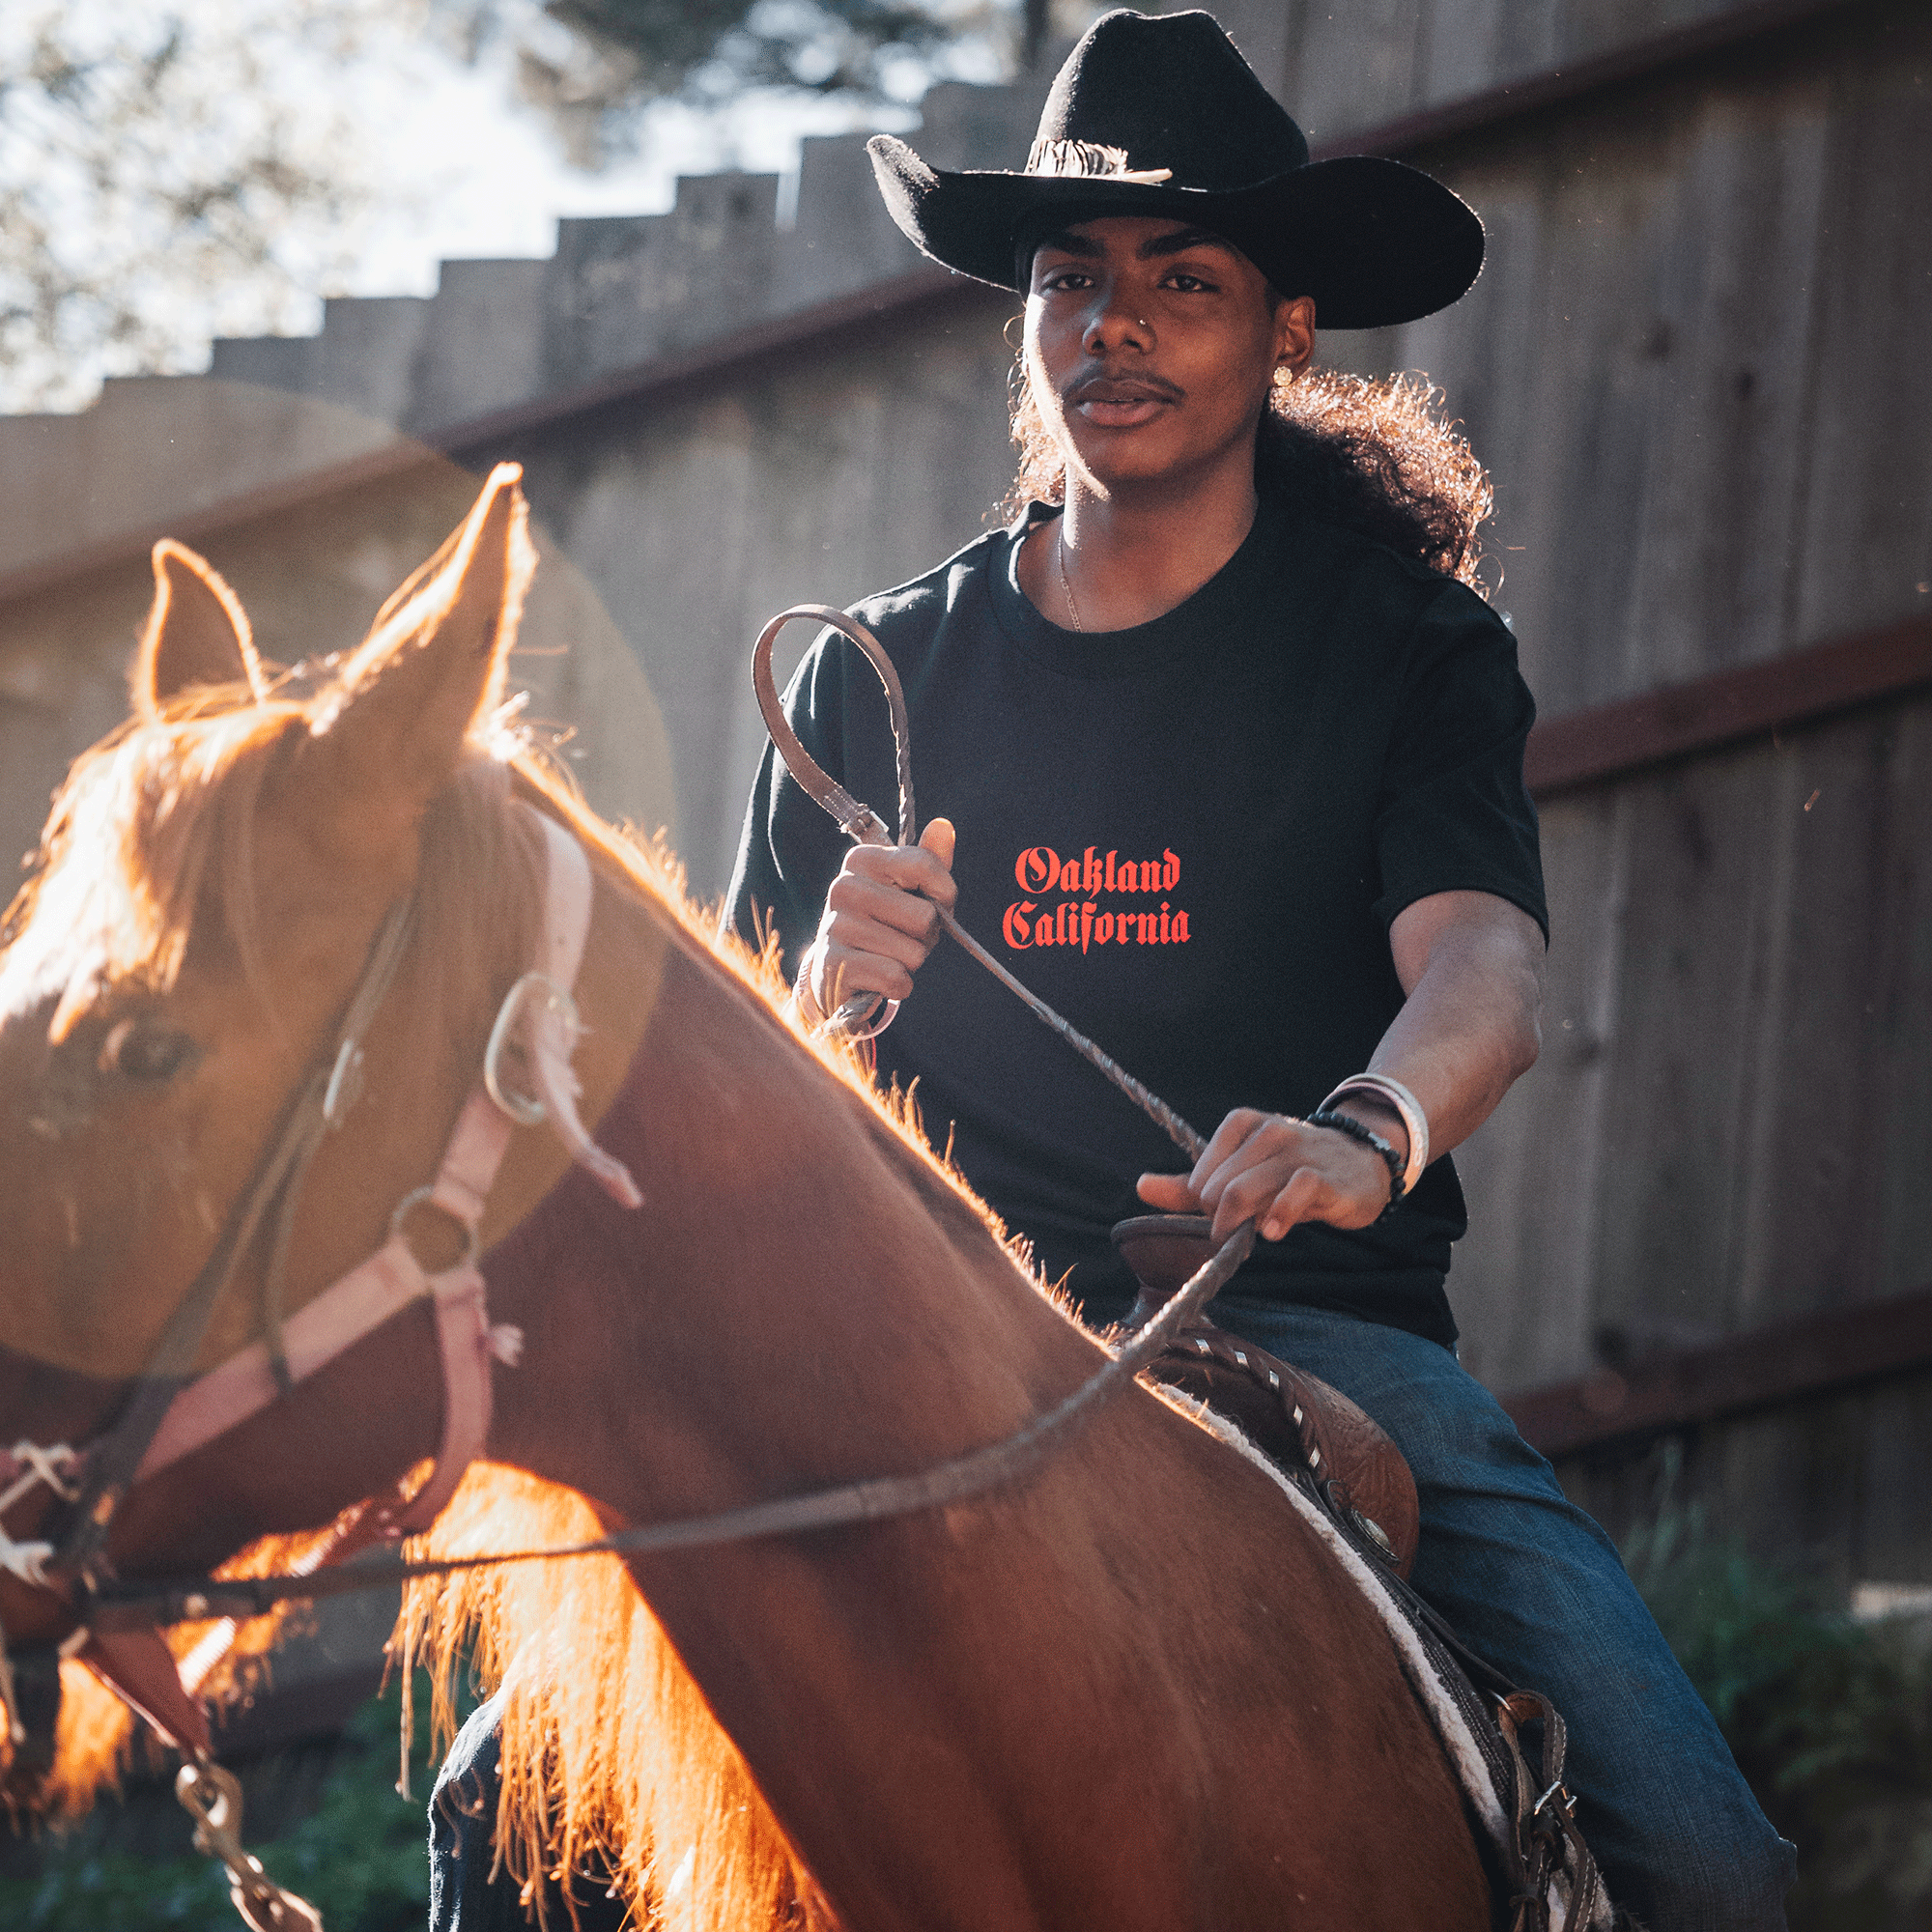 Model on a horse wearing  black tee with Oakland California printed centered in red ink.